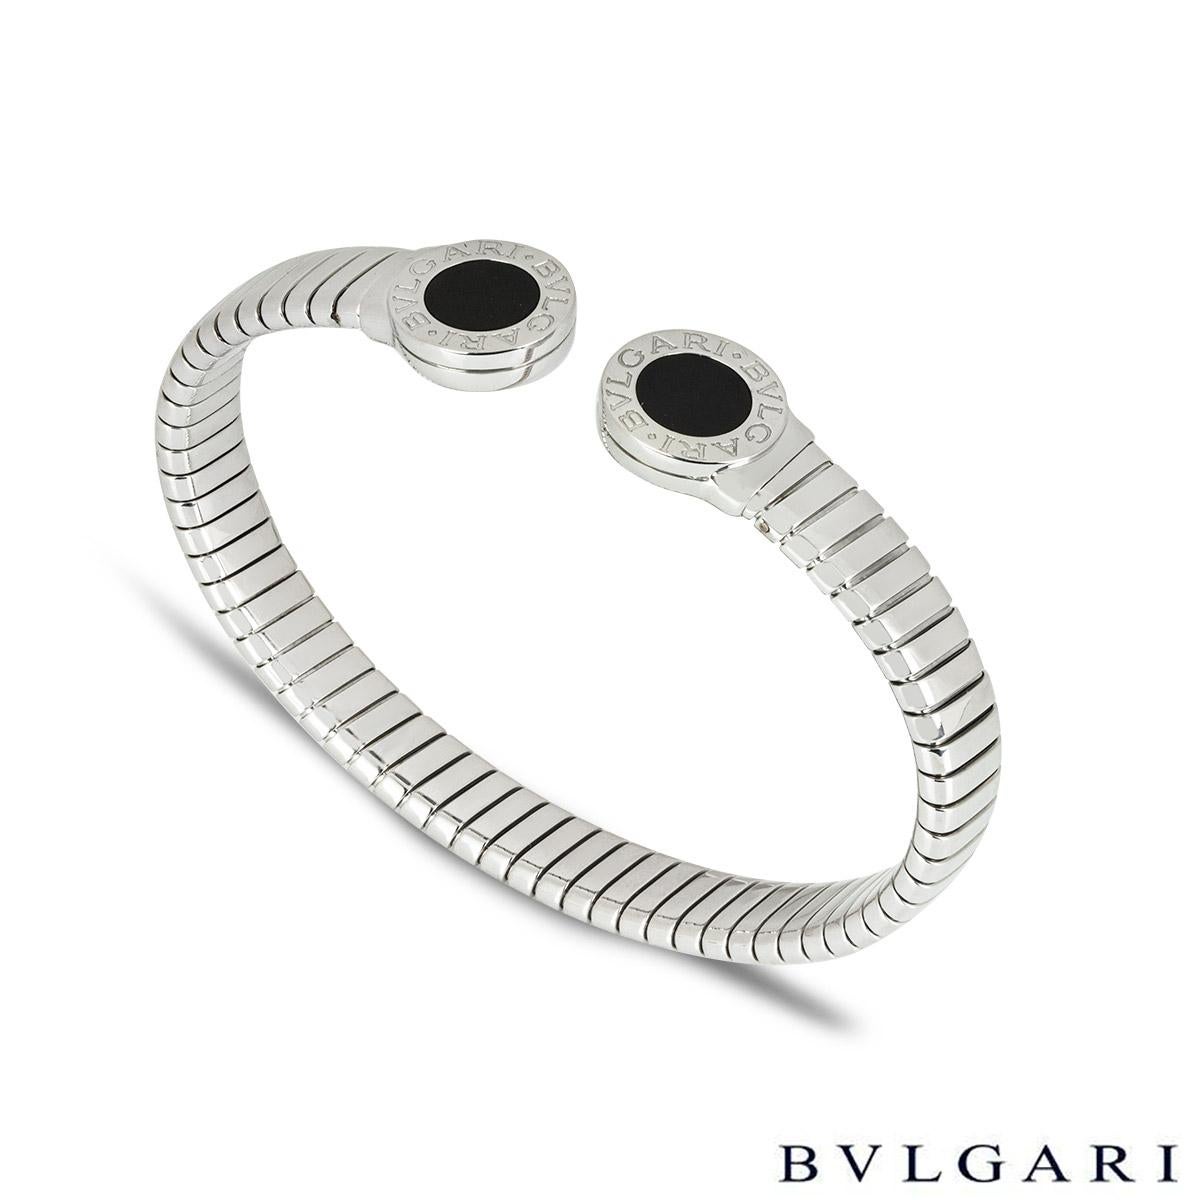 A chic stainless steel bracelet by Bvlgari from the Bvlgari Bvlgari collection. The cuff-style bracelet is set with 2 circular onyx inlays engraved with 'Bvlgari Bvlgari' around the edge. The Tubogas bracelet measures 8.4mm wide, is a size M which